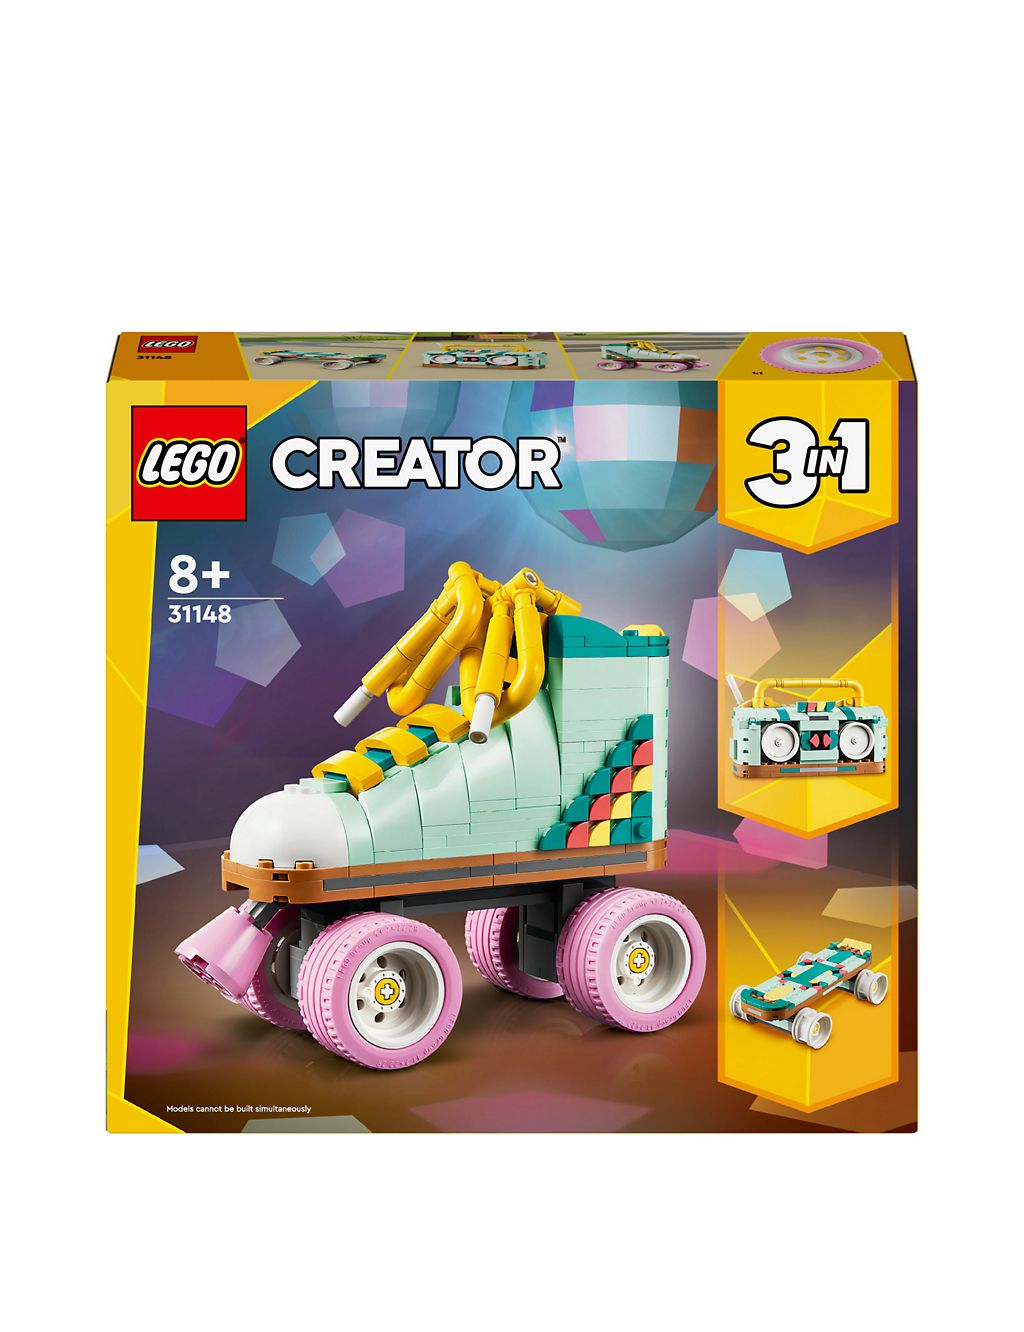 LEGO Creator 3in1 Retro Roller Skate Toy Set 31148 (8+ Yrs) 1 of 6